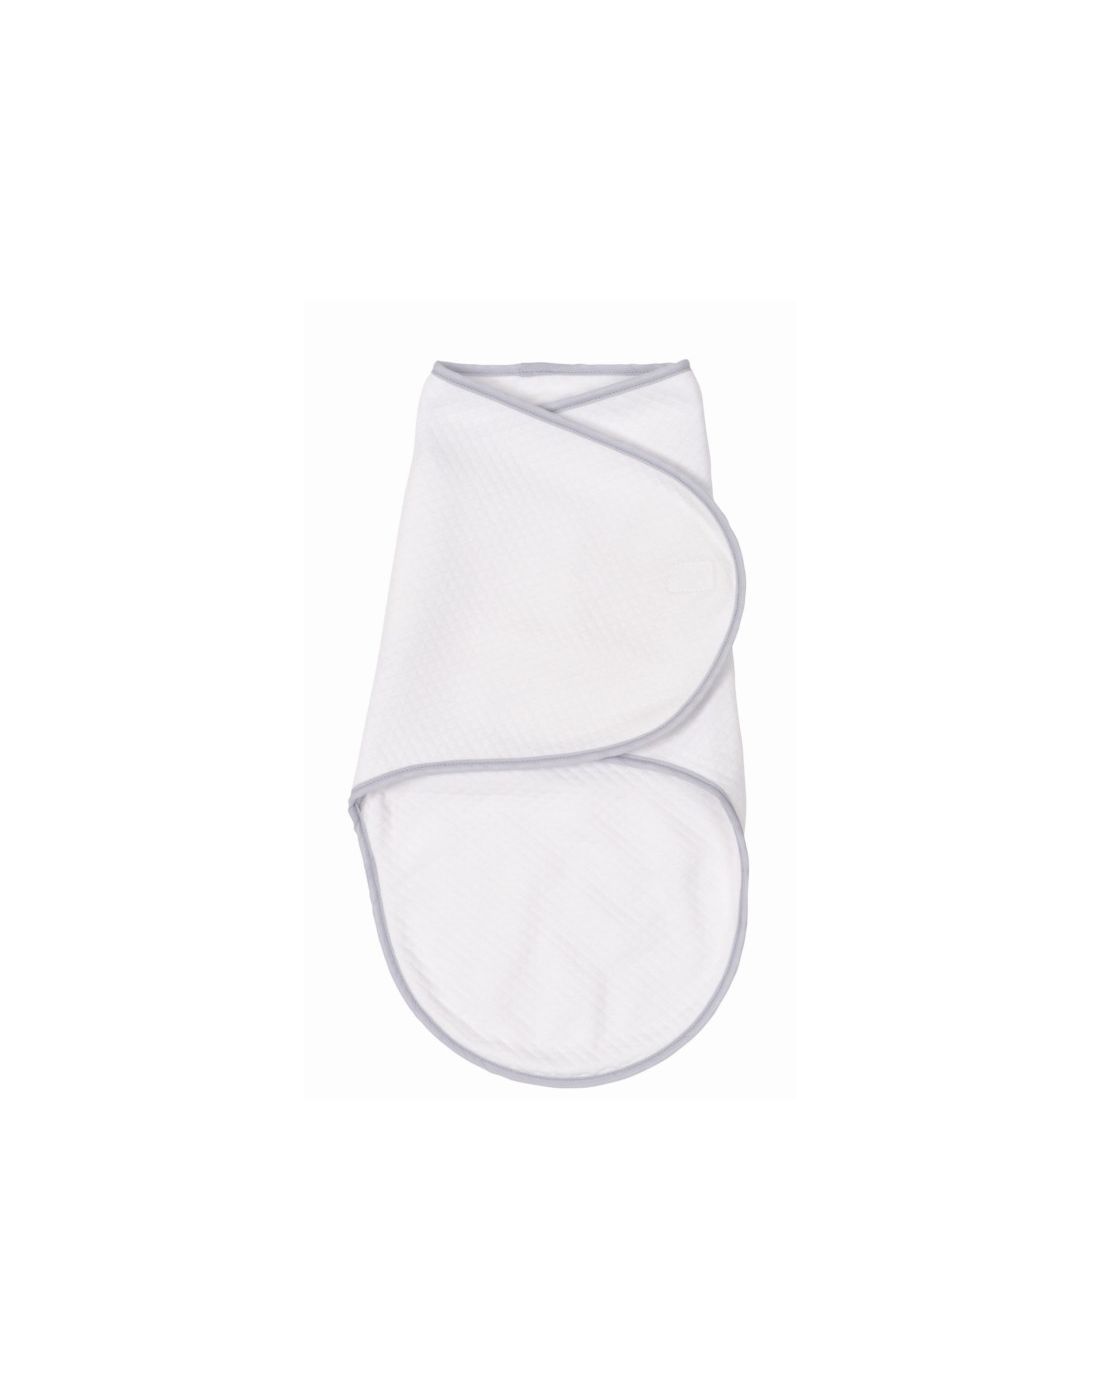 Candide Baby Swaddle Blanket White